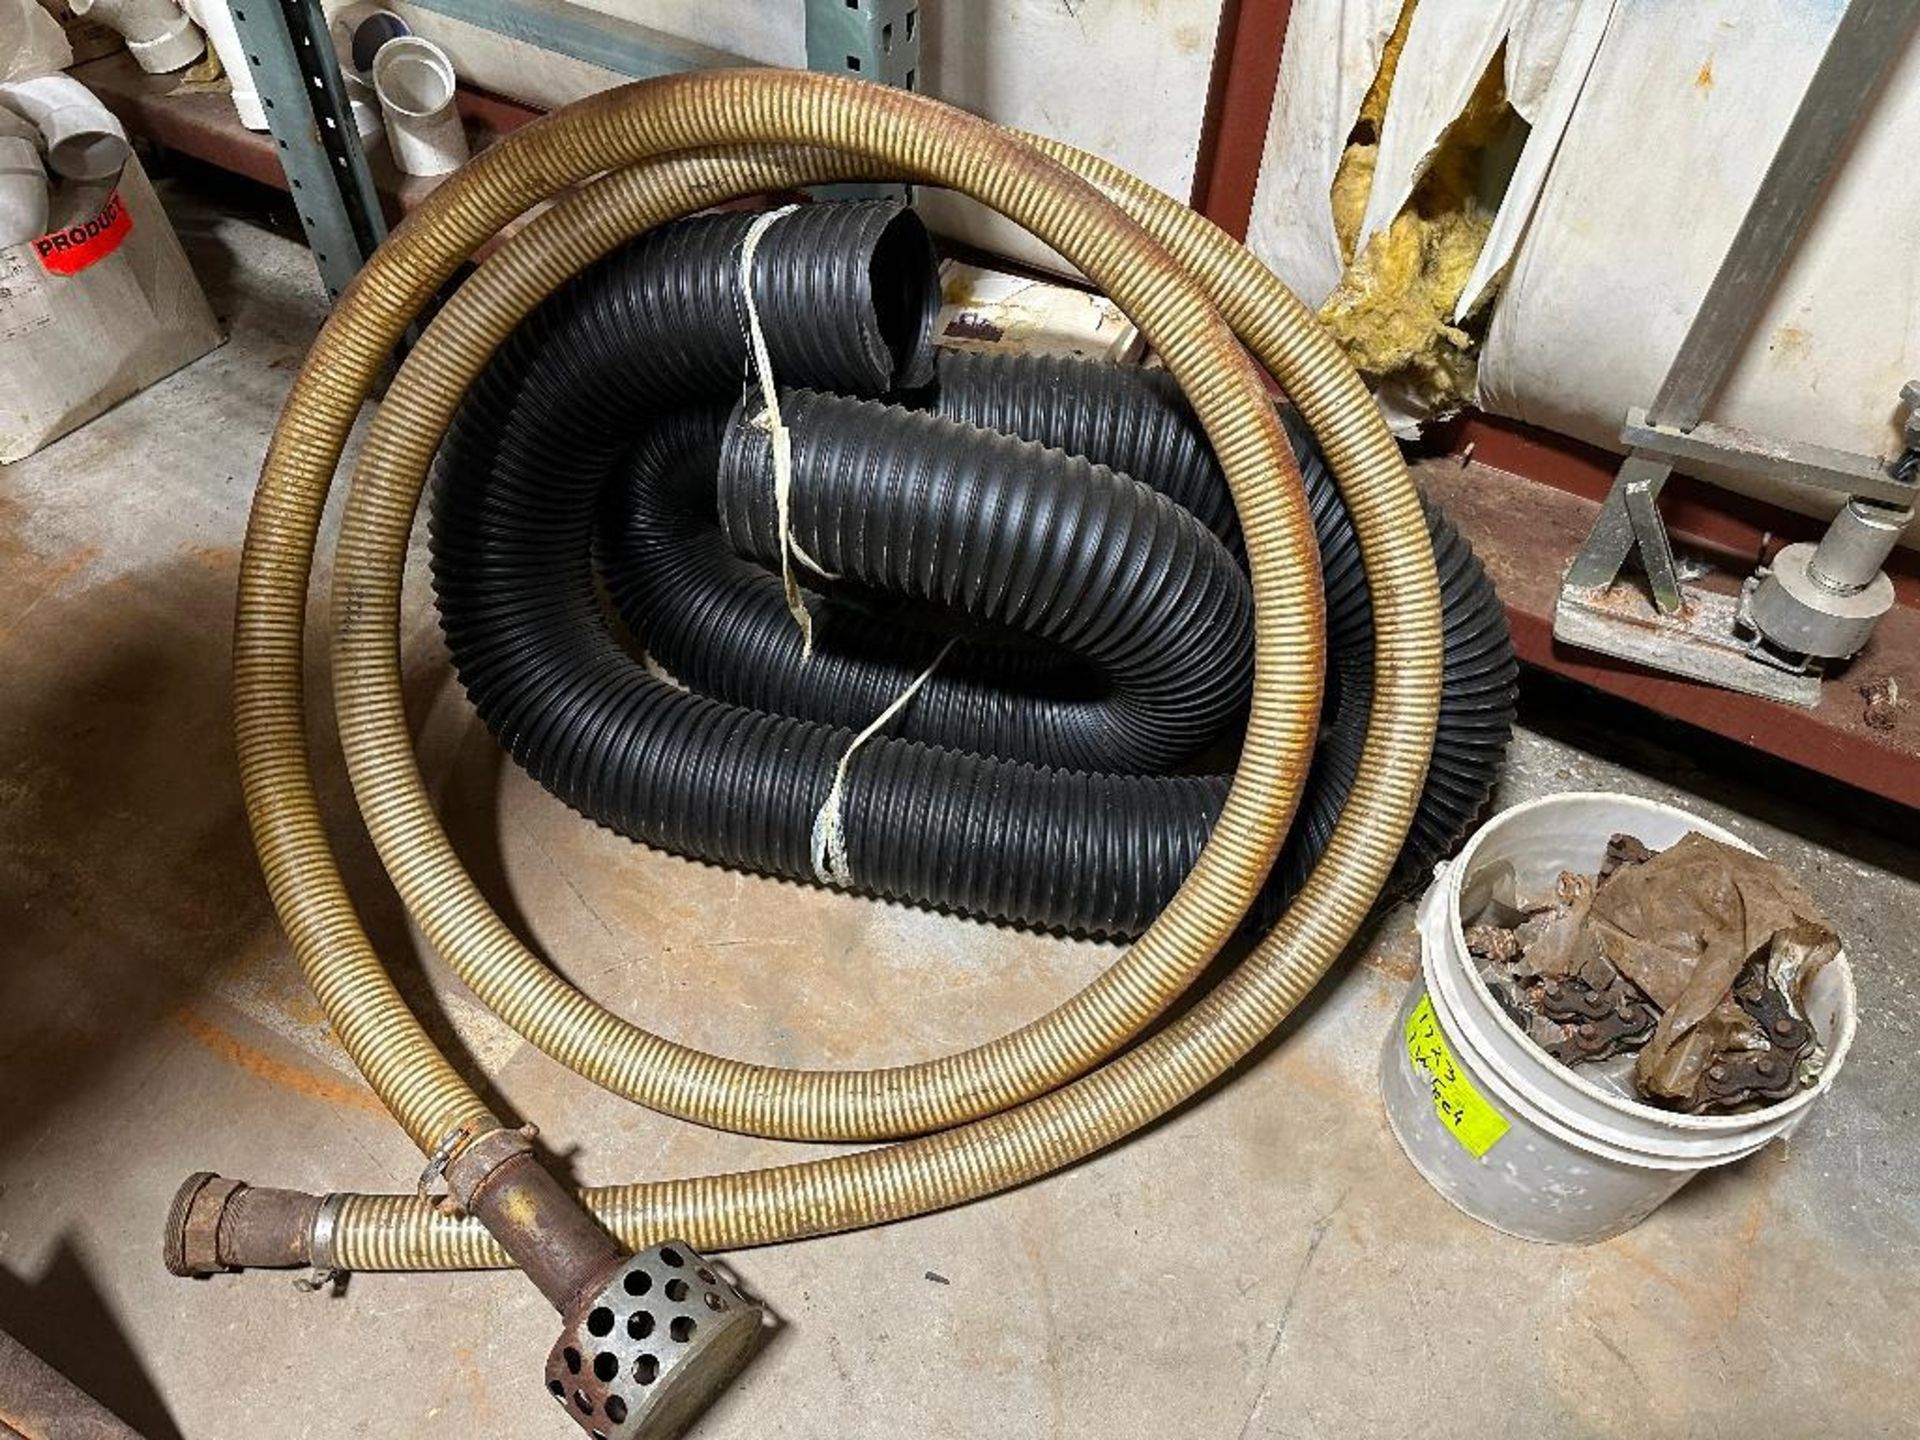 PUMP HOSE WITH ASSORTED TUBING AND MISC. ITEMS IN CORNER - Image 2 of 7